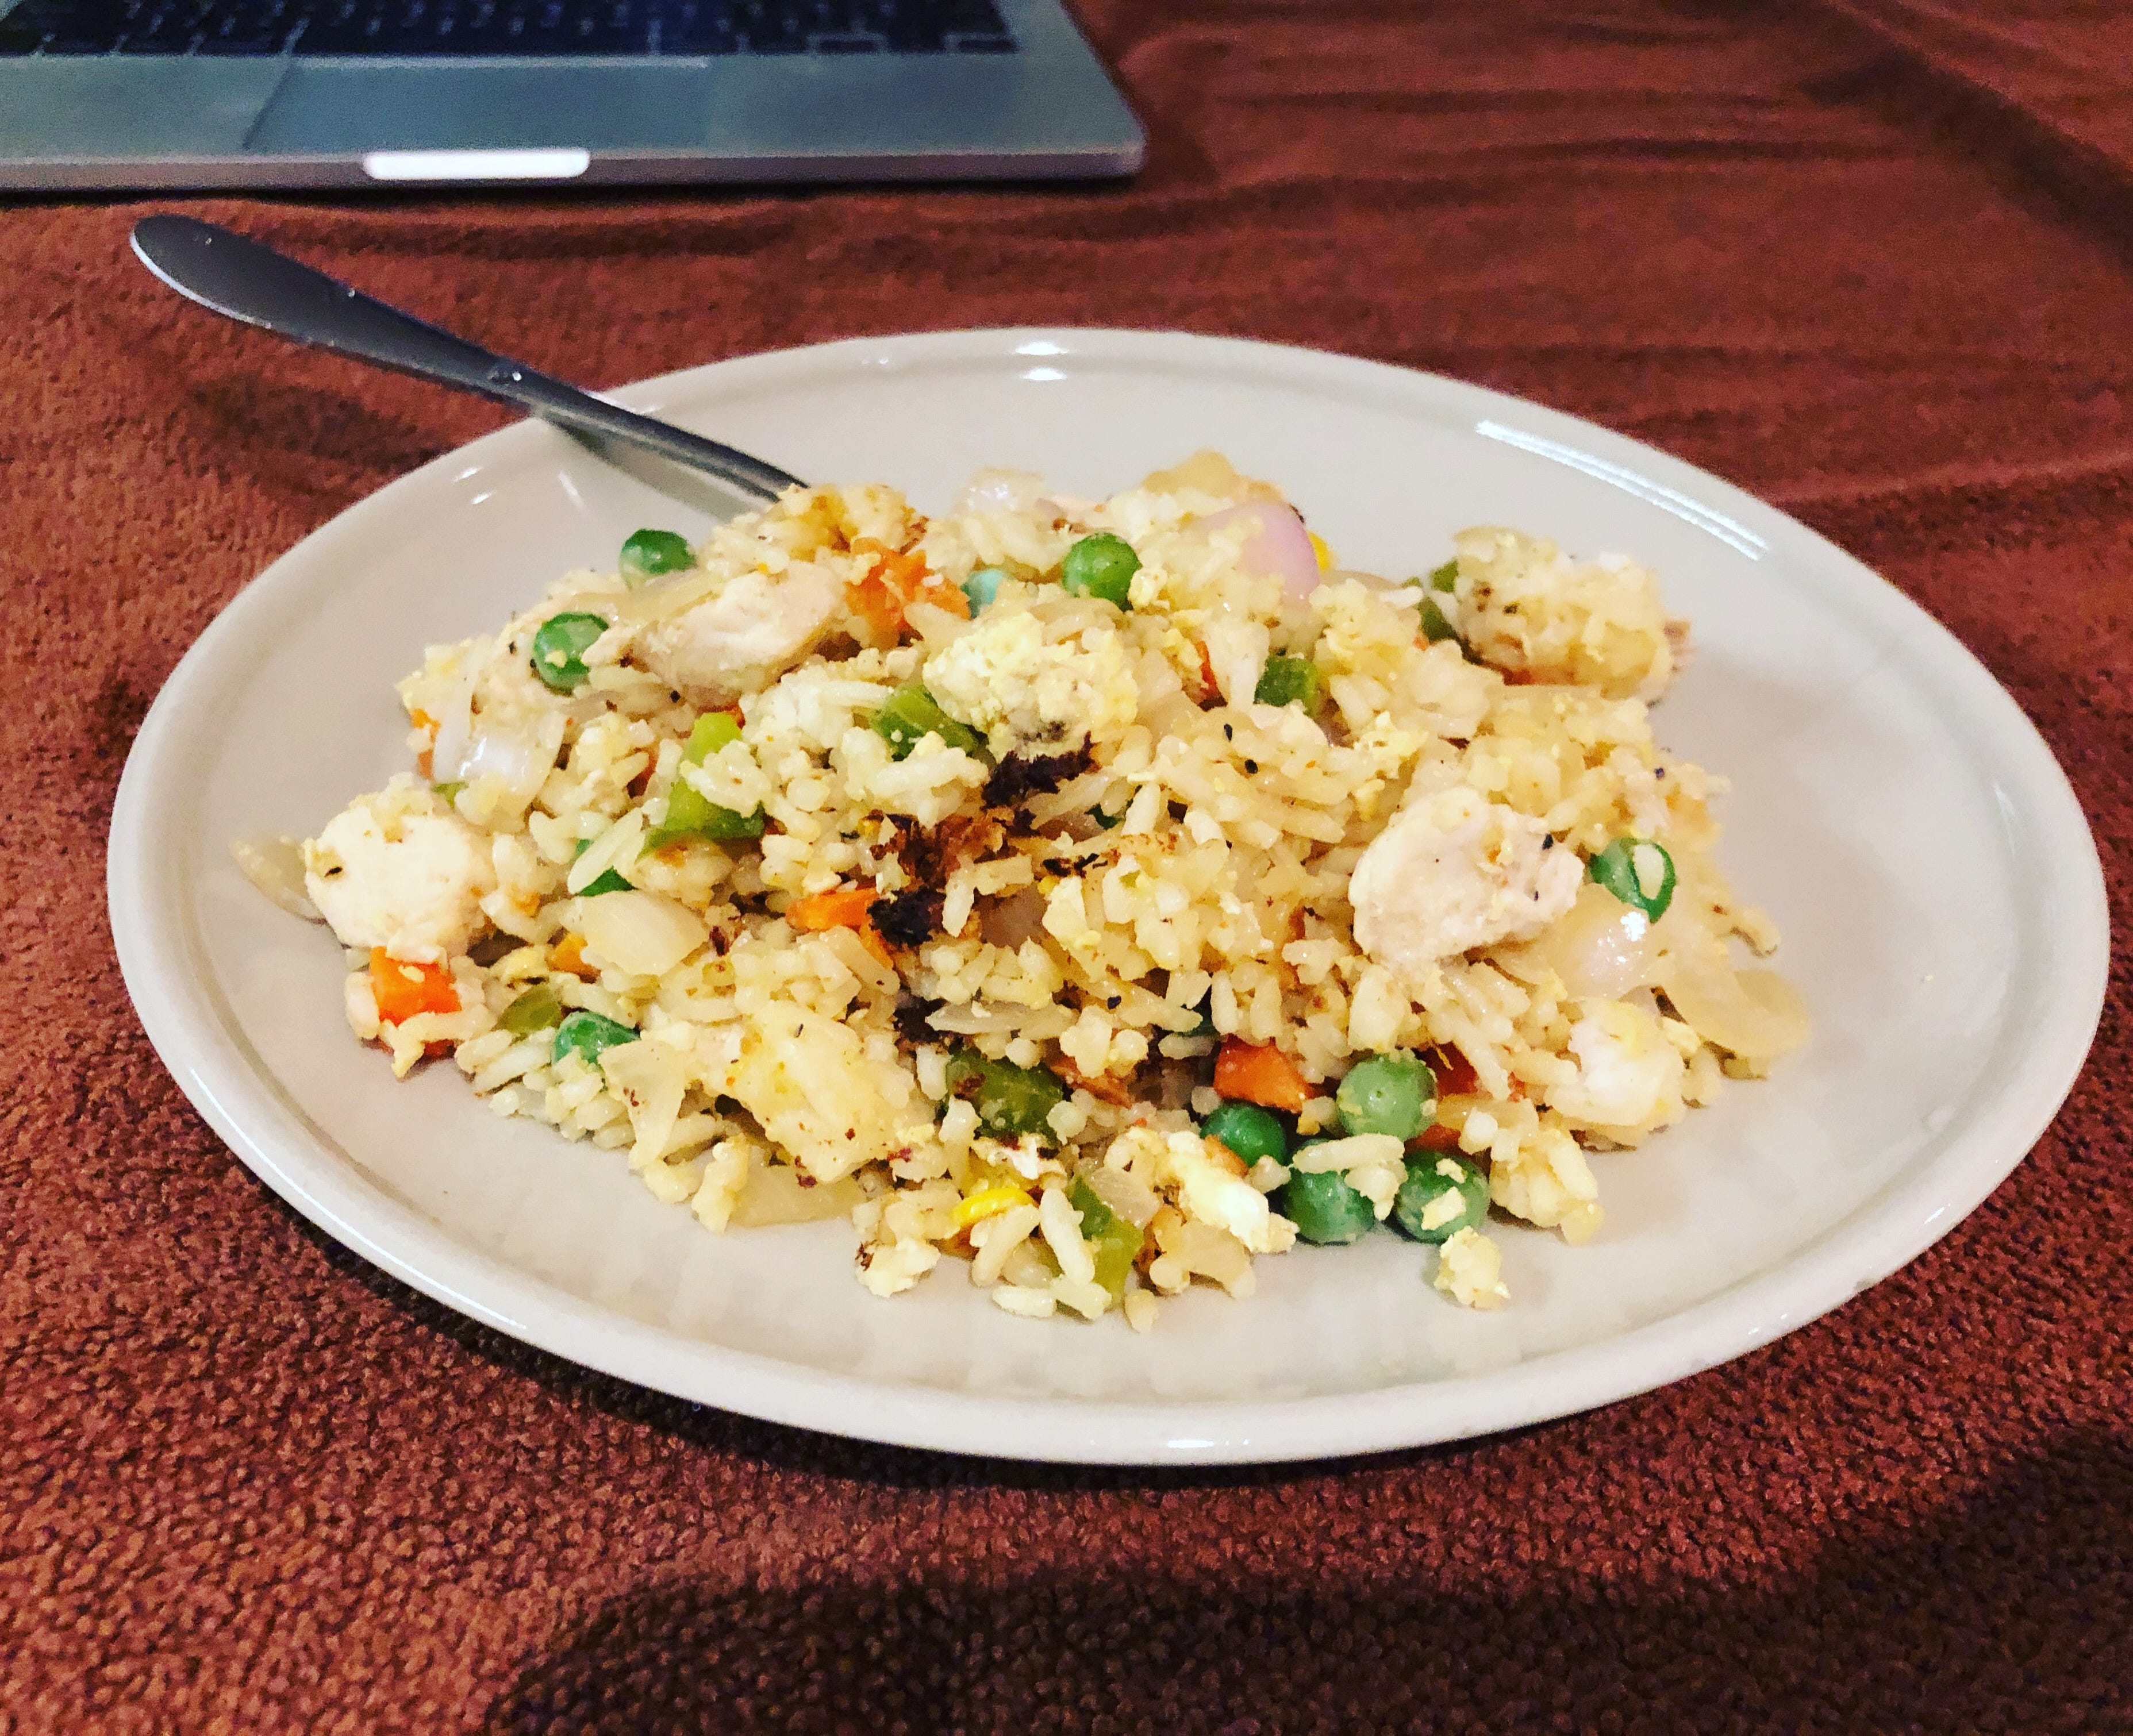 chicken fried rice (my favourite) — fun fact: I left gym early bc I was craving this …